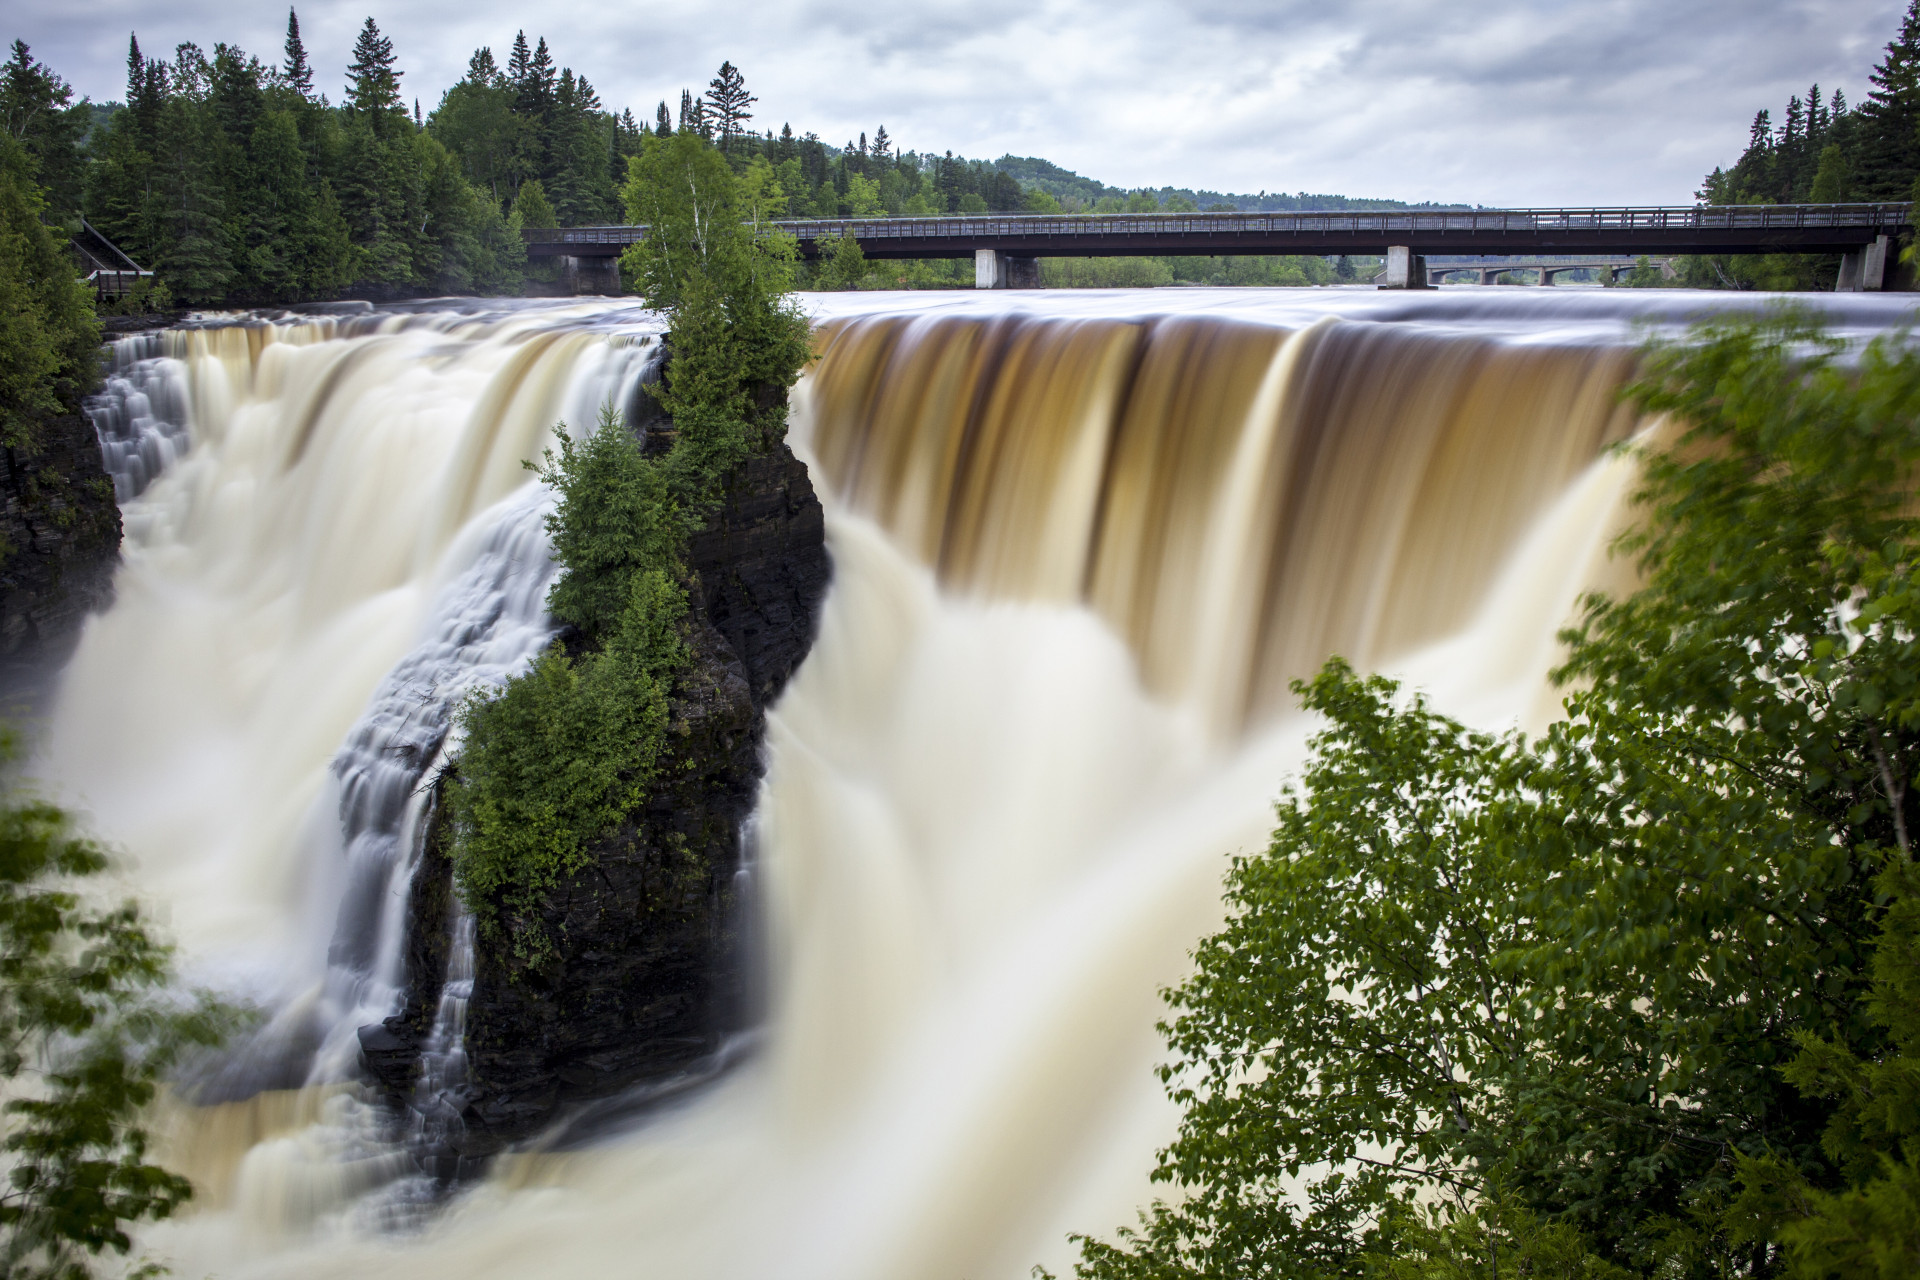 Take in the massive Kakabeka Falls, then treat yourself to fine Canadian dining in town at The Silver Birch. <p>You may also like:<a href="https://www.starsinsider.com/n/367241?utm_source=msn.com&utm_medium=display&utm_campaign=referral_description&utm_content=384585v6en-us"> Unmasking the monsters: actors playing cinematic creatures</a></p>